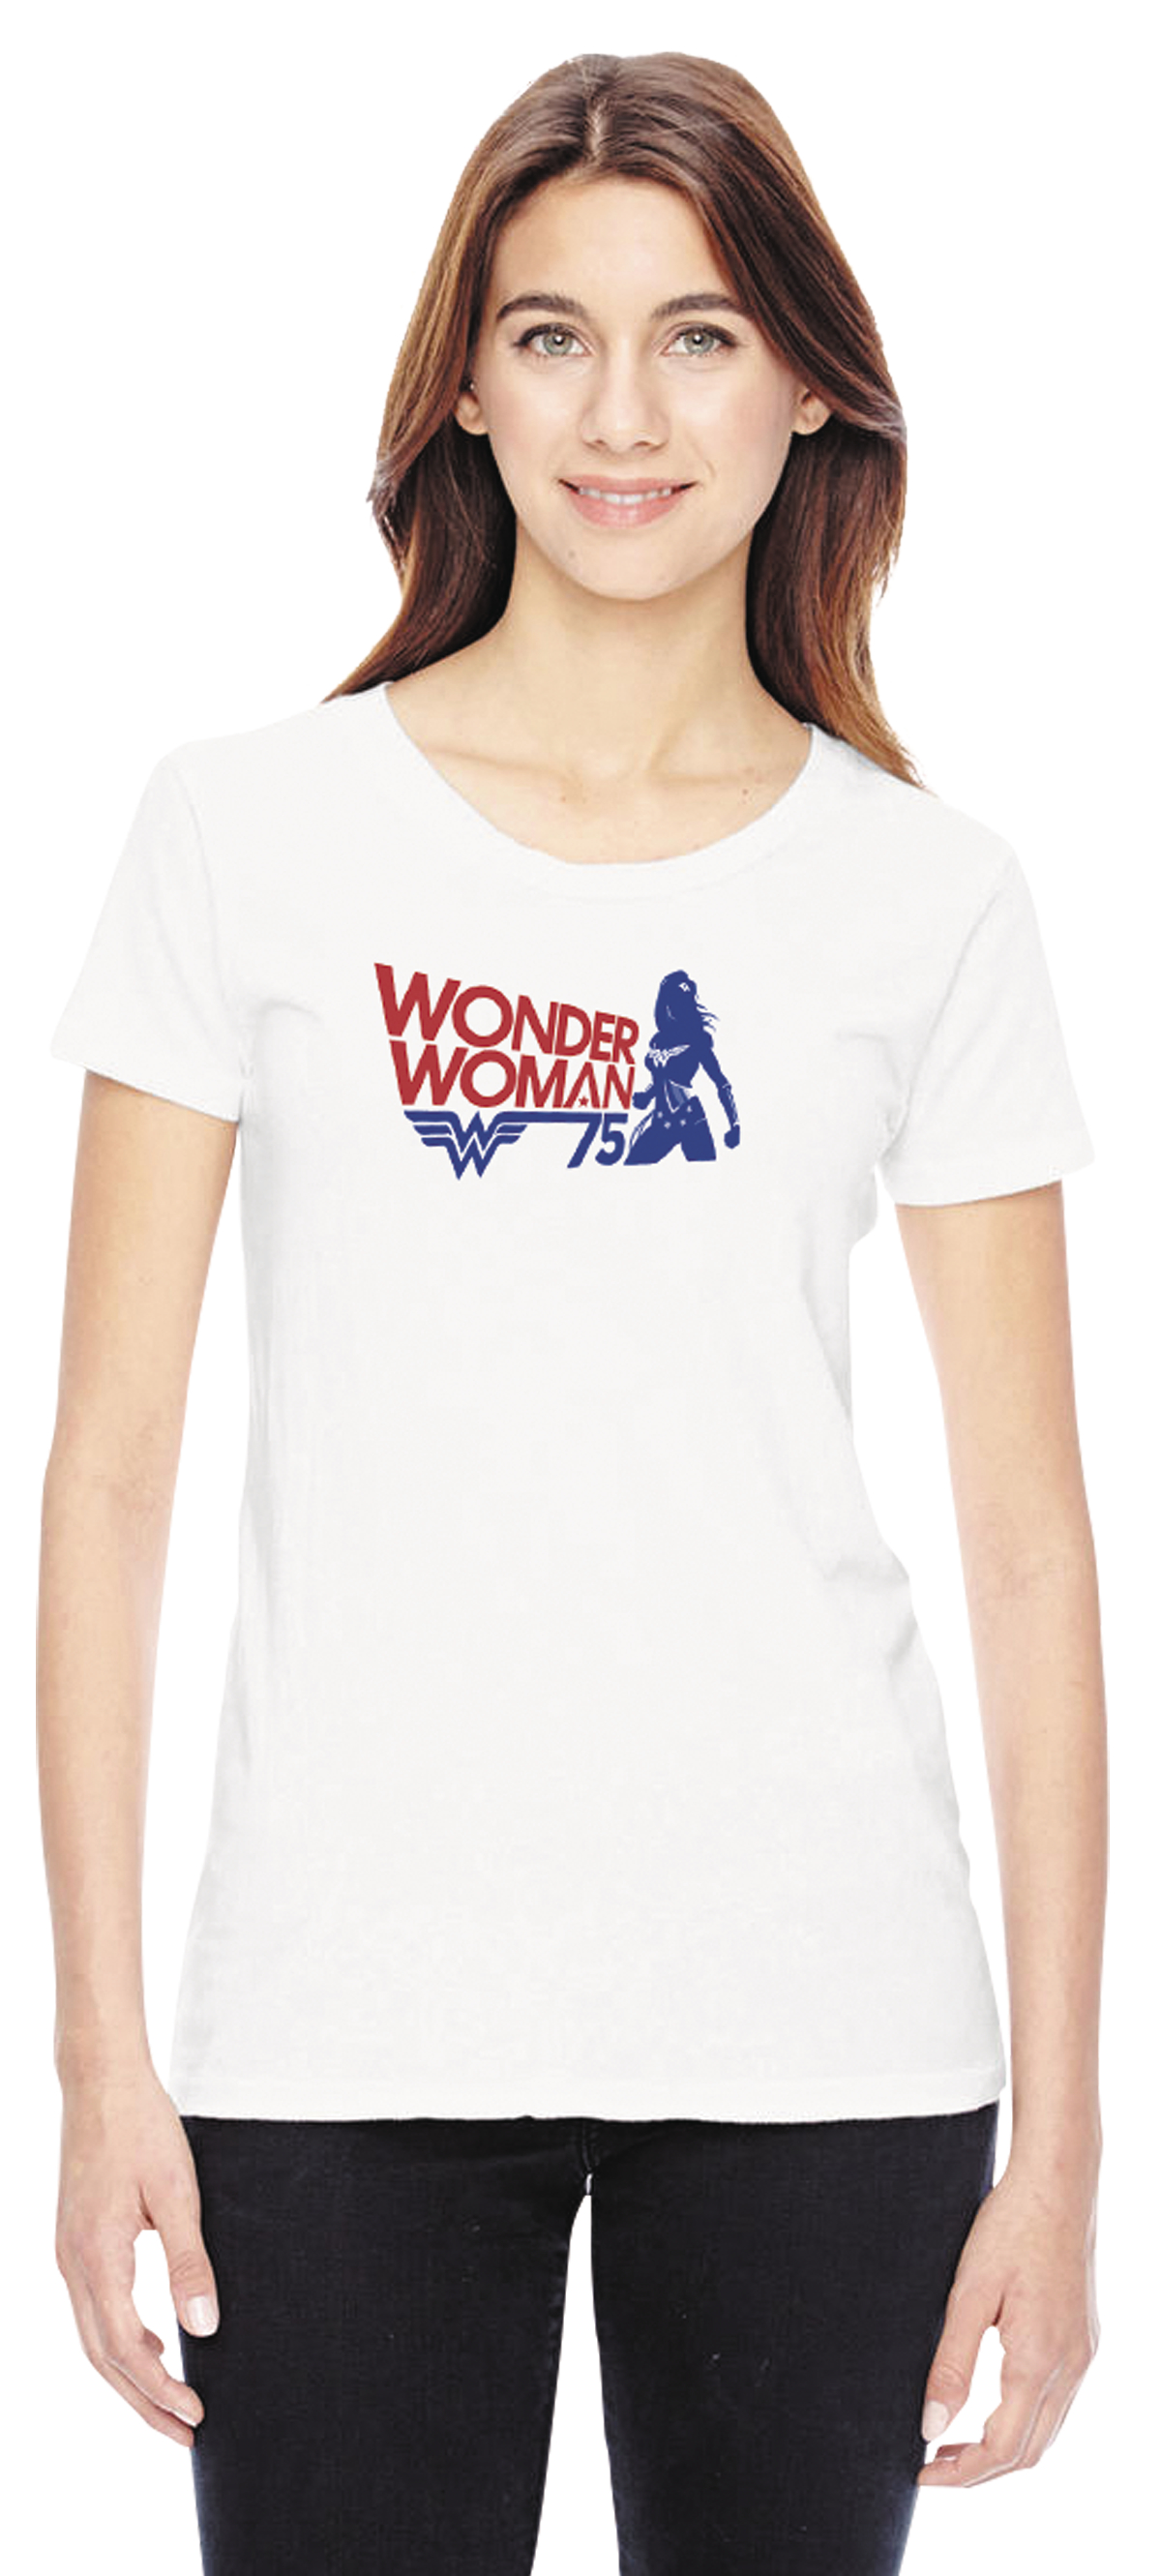 OCT162343 - WONDER WOMAN 75TH ANNIVERSARY WOMENS T/S MED - Previews World